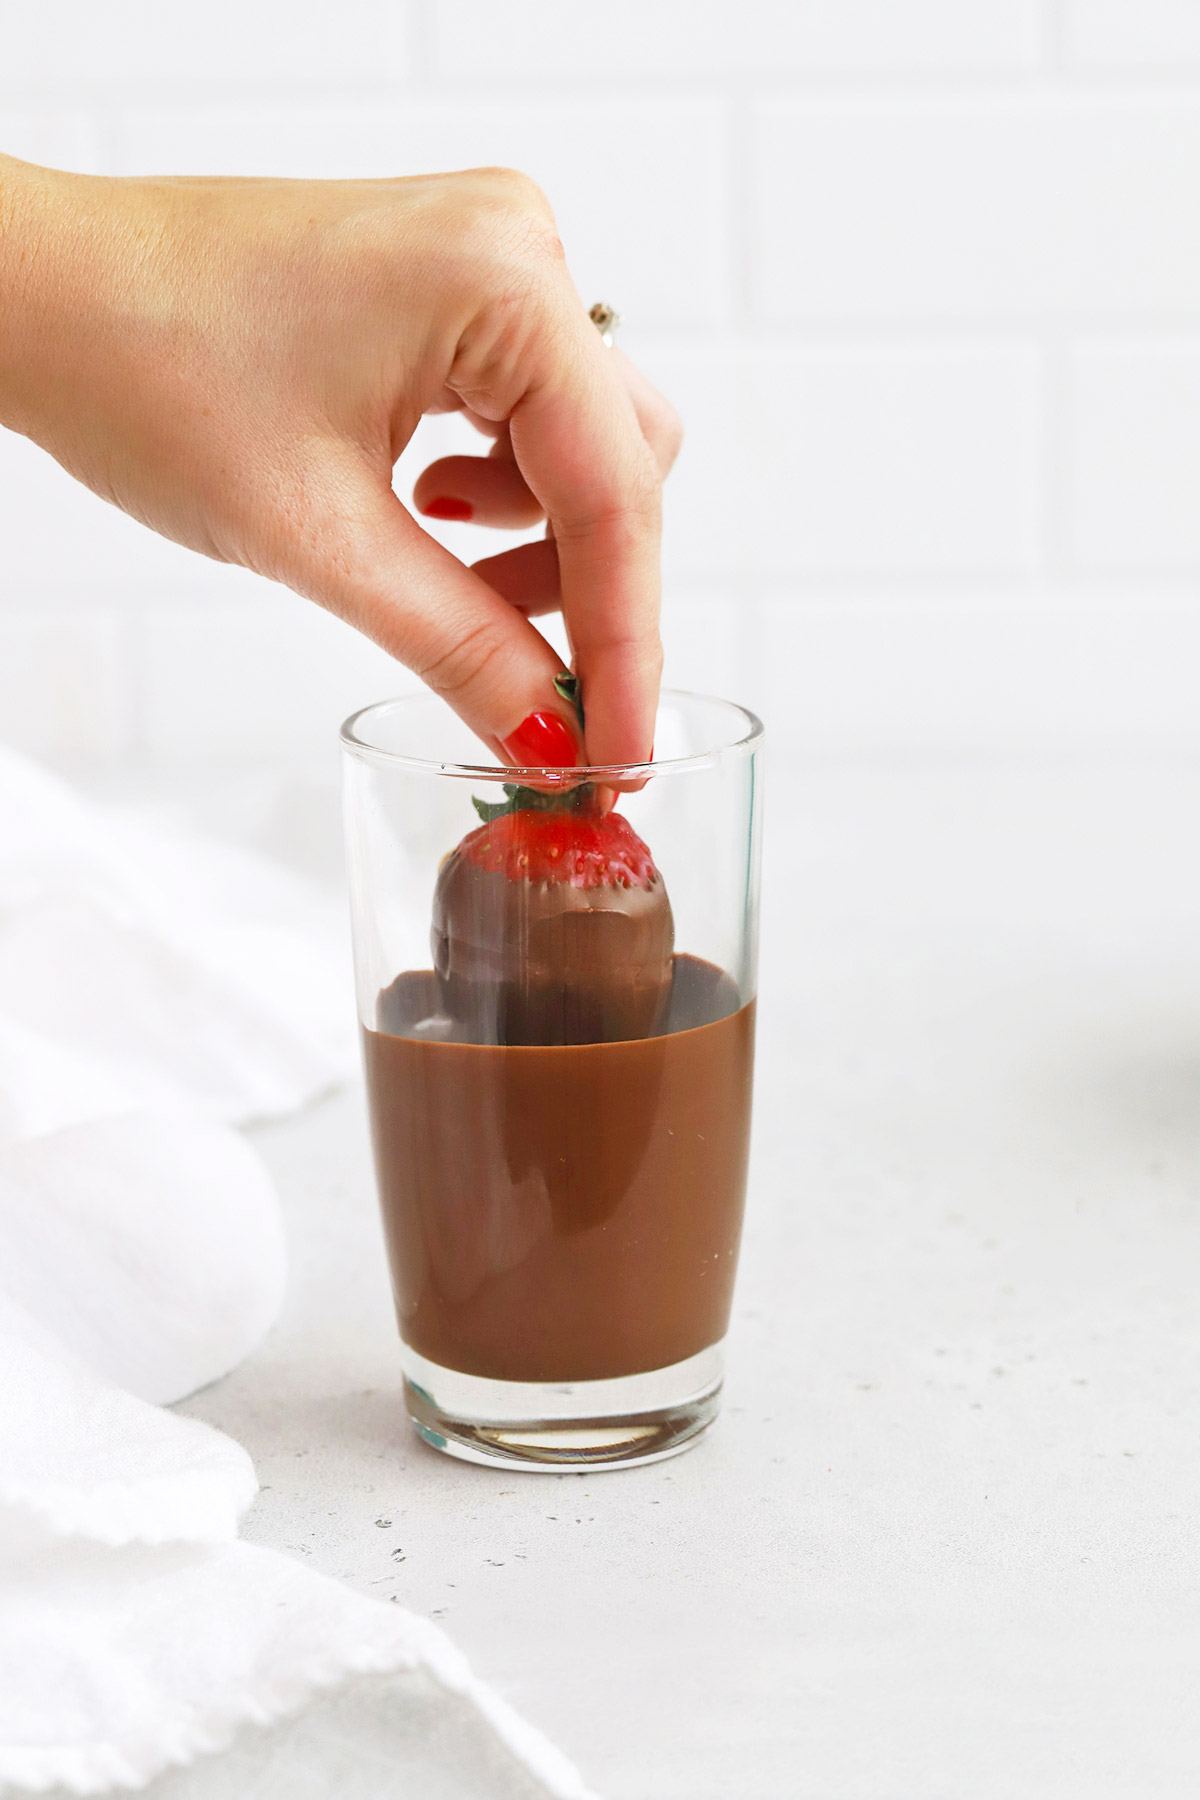 Front view of a hand dipping a strawberry into a glass of dairy-free chocolate